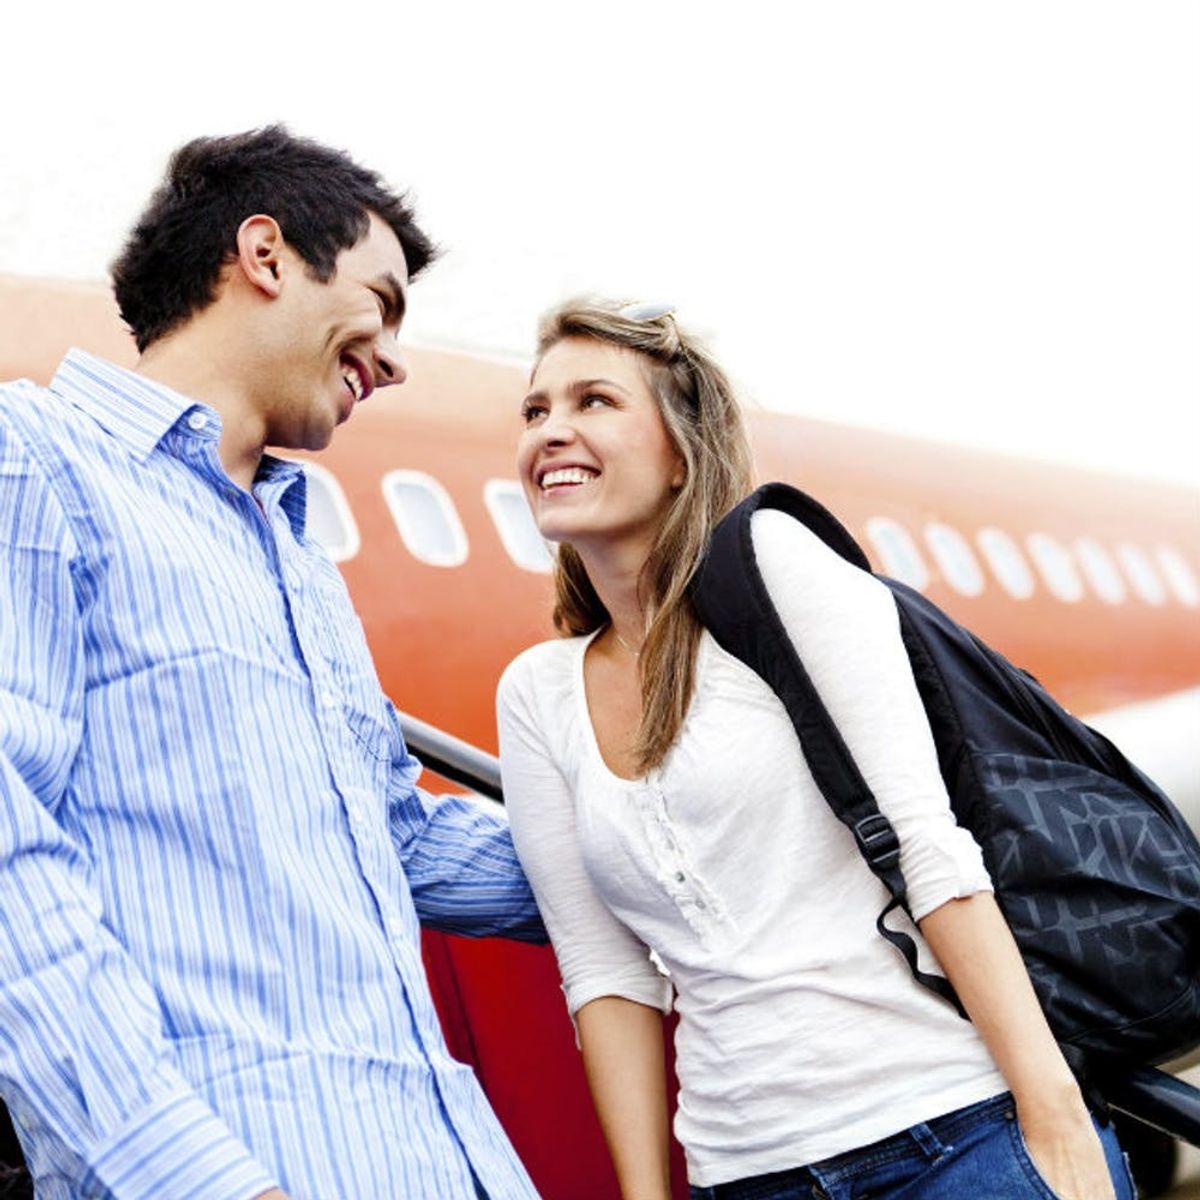 These Are the Top 10 Airports for Finding Love